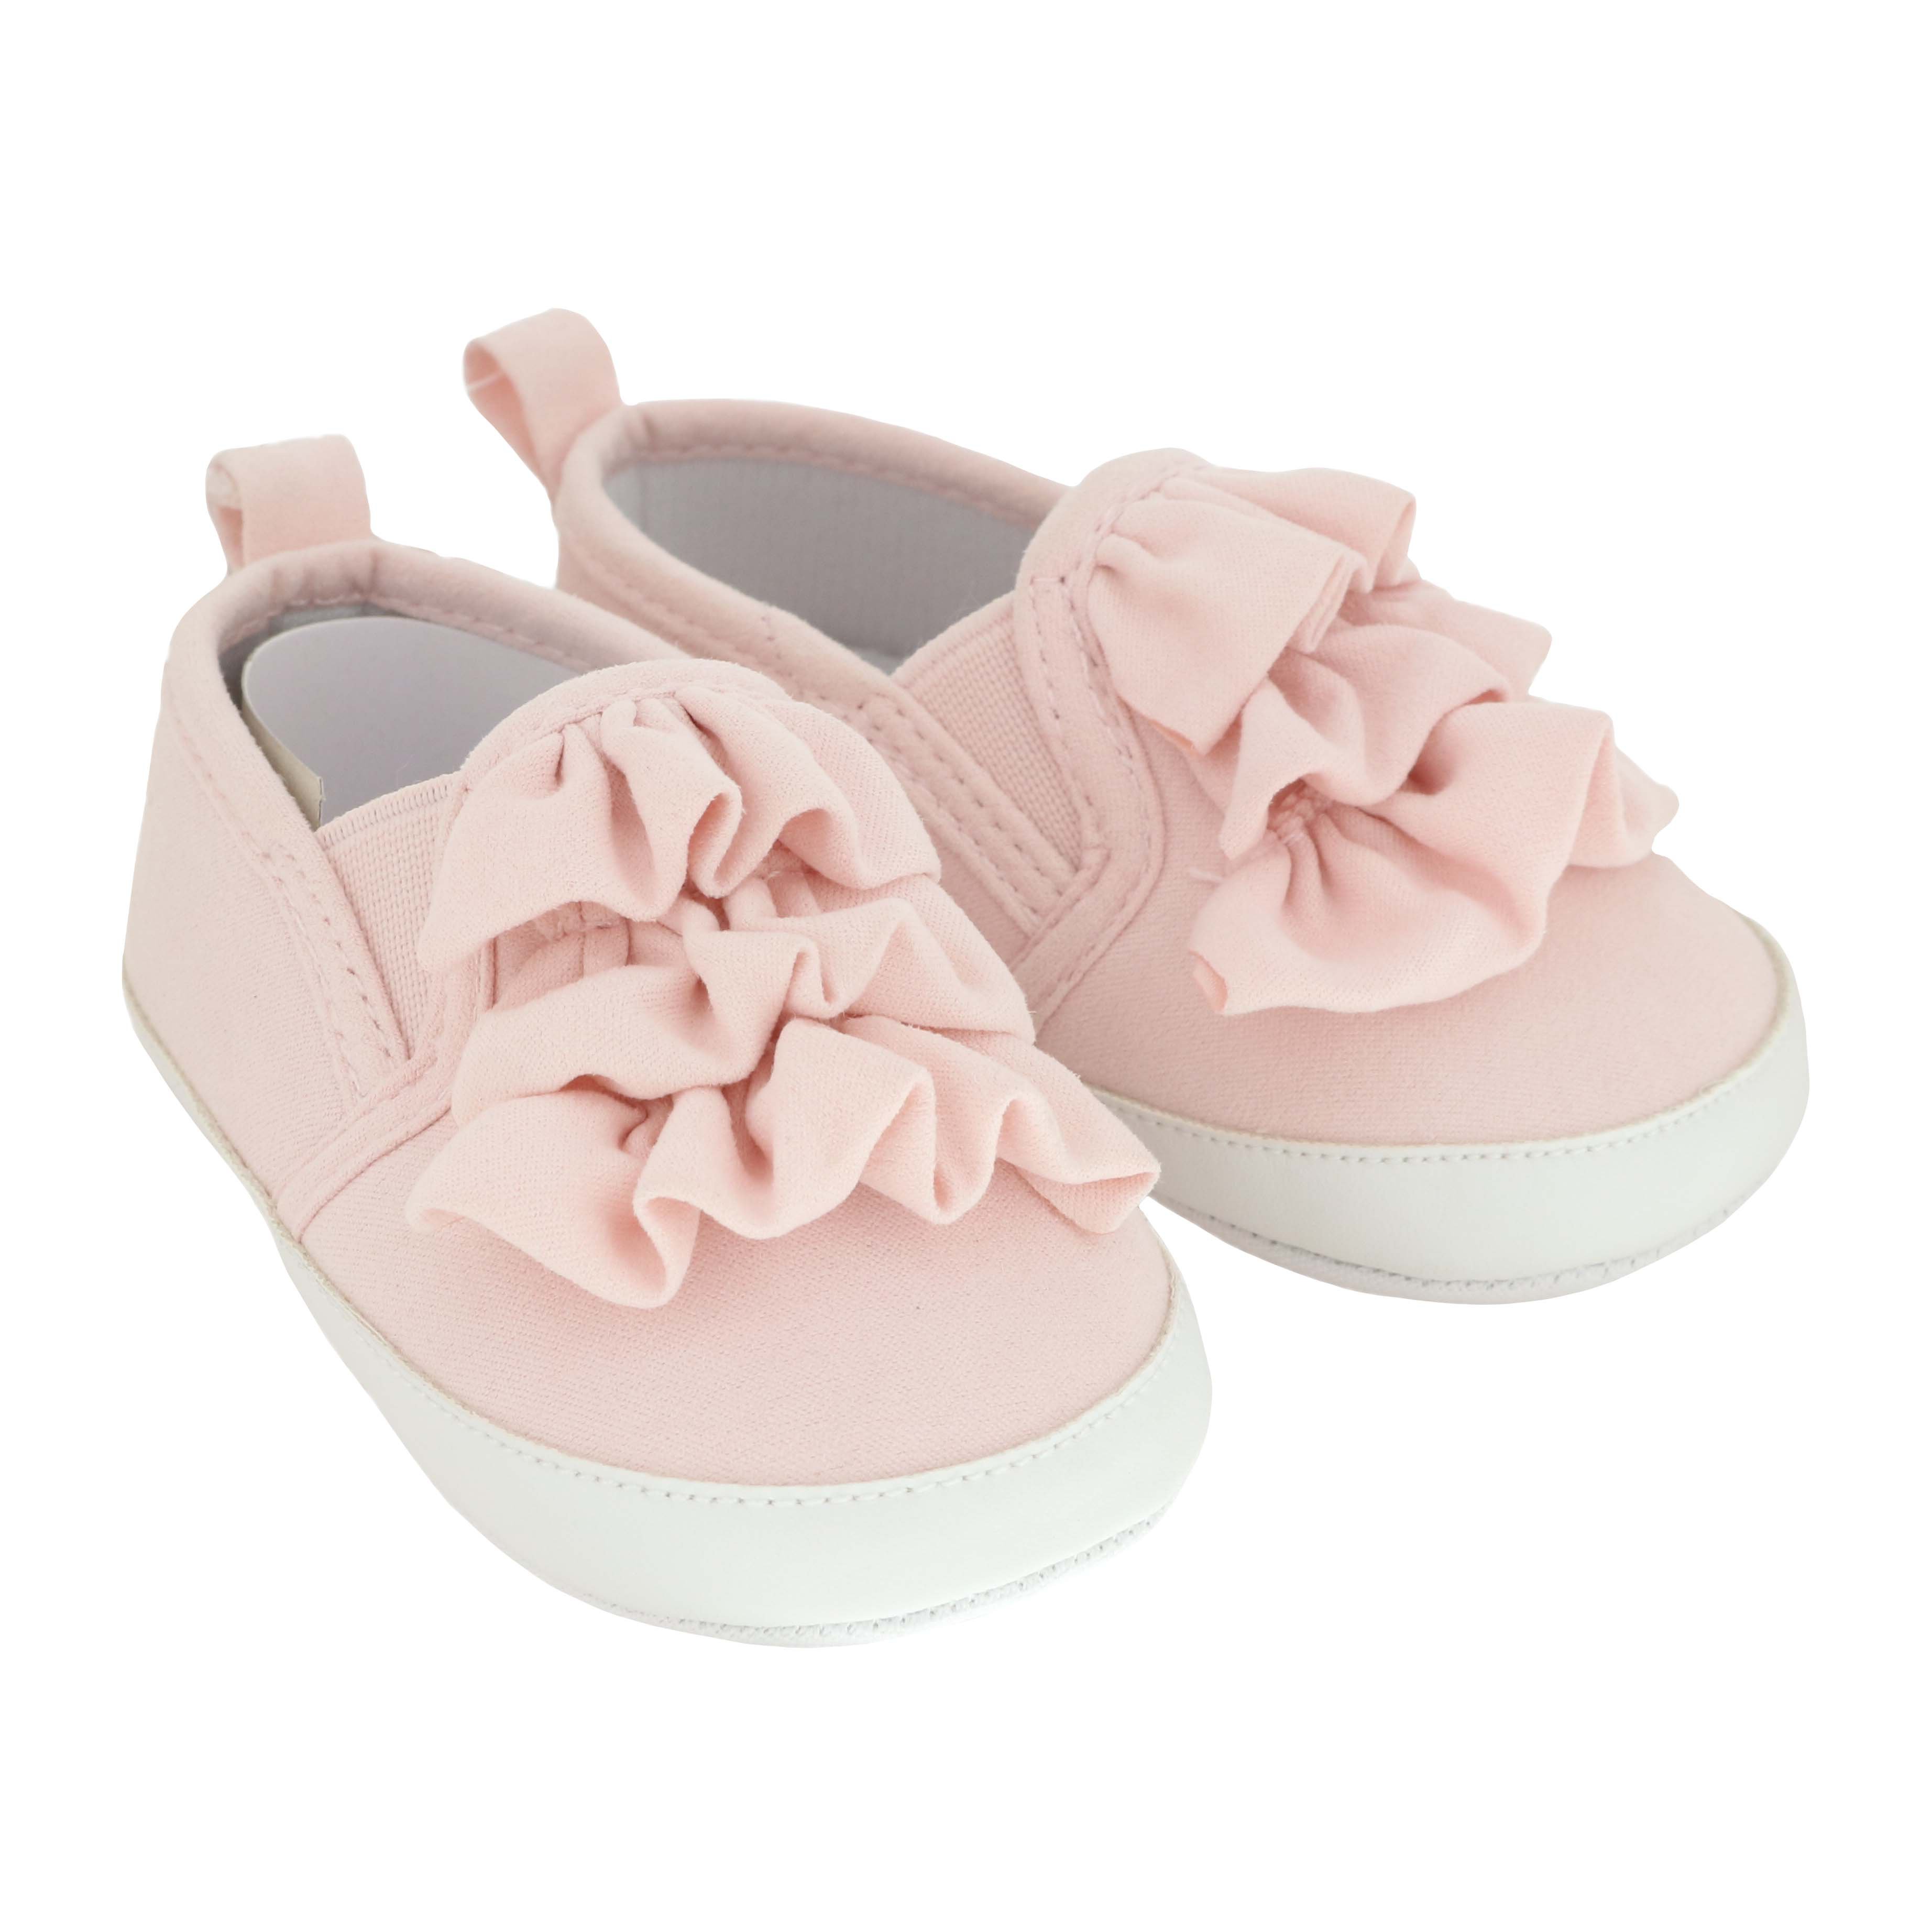 infant sneakers size 3